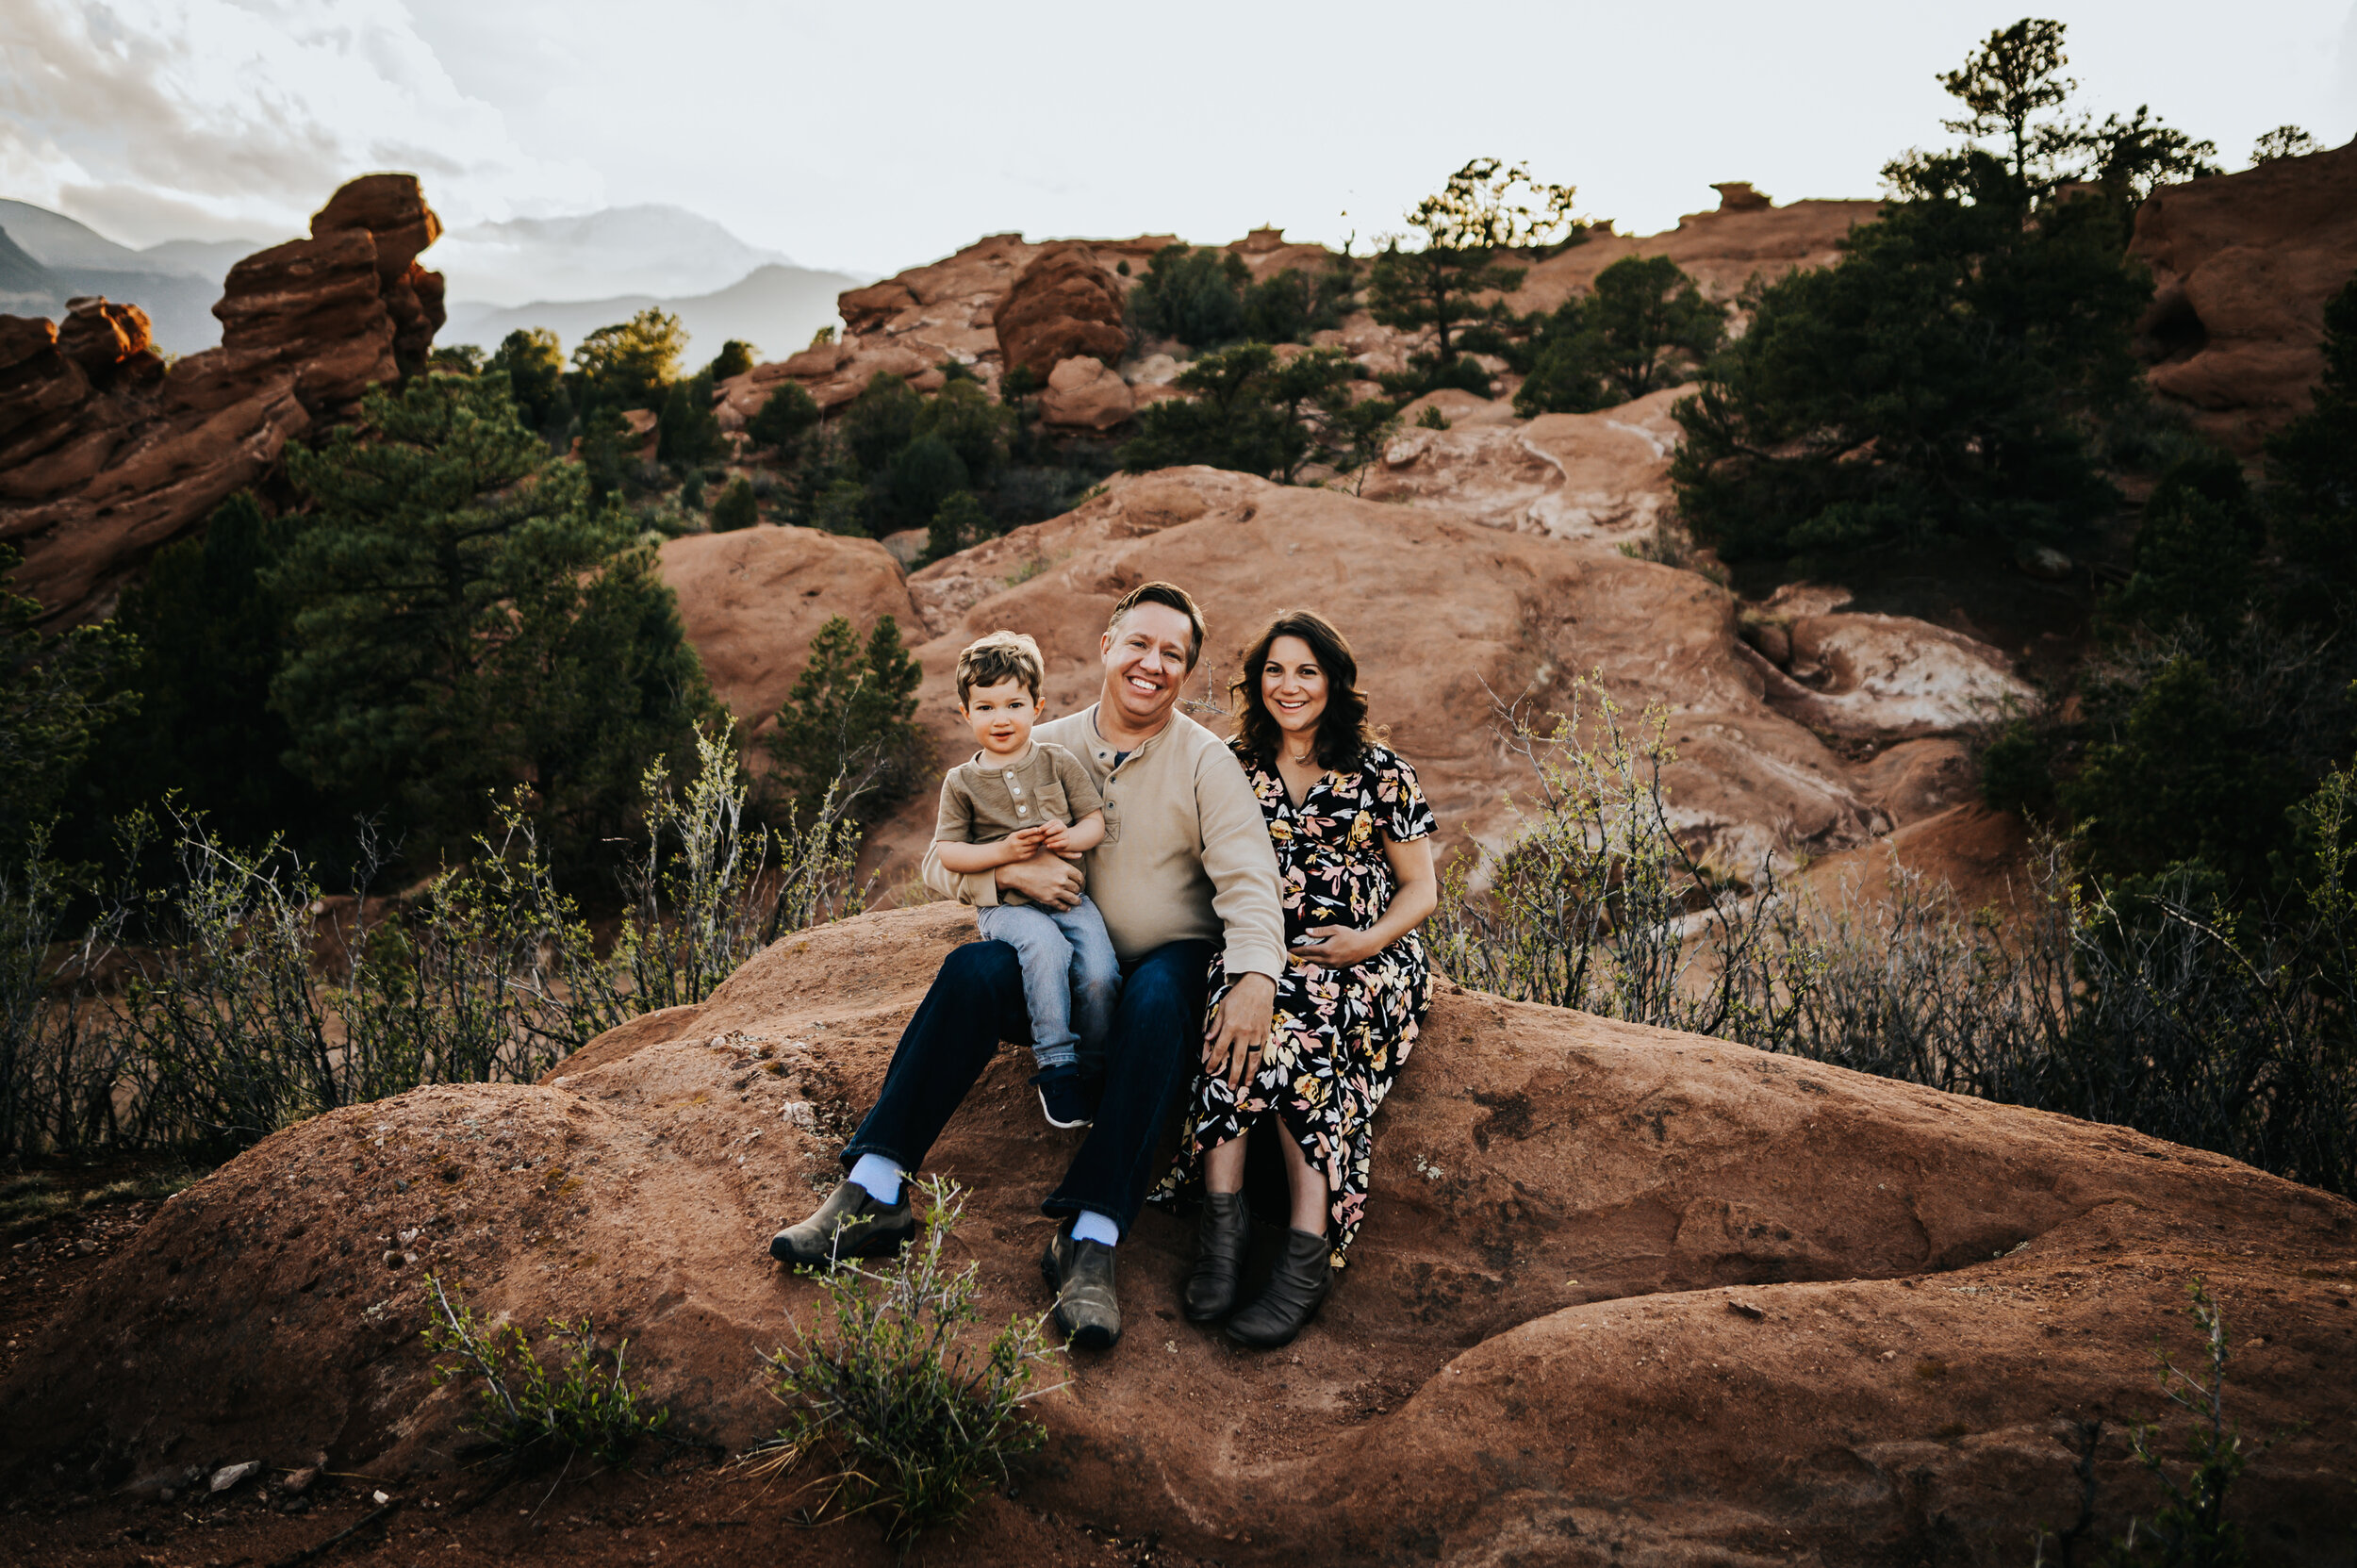 Andrea Grimm Maternity Family Session Colorado Springs Sunset Garden of the Gods Wild Prairie Photography-6-2020.jpg